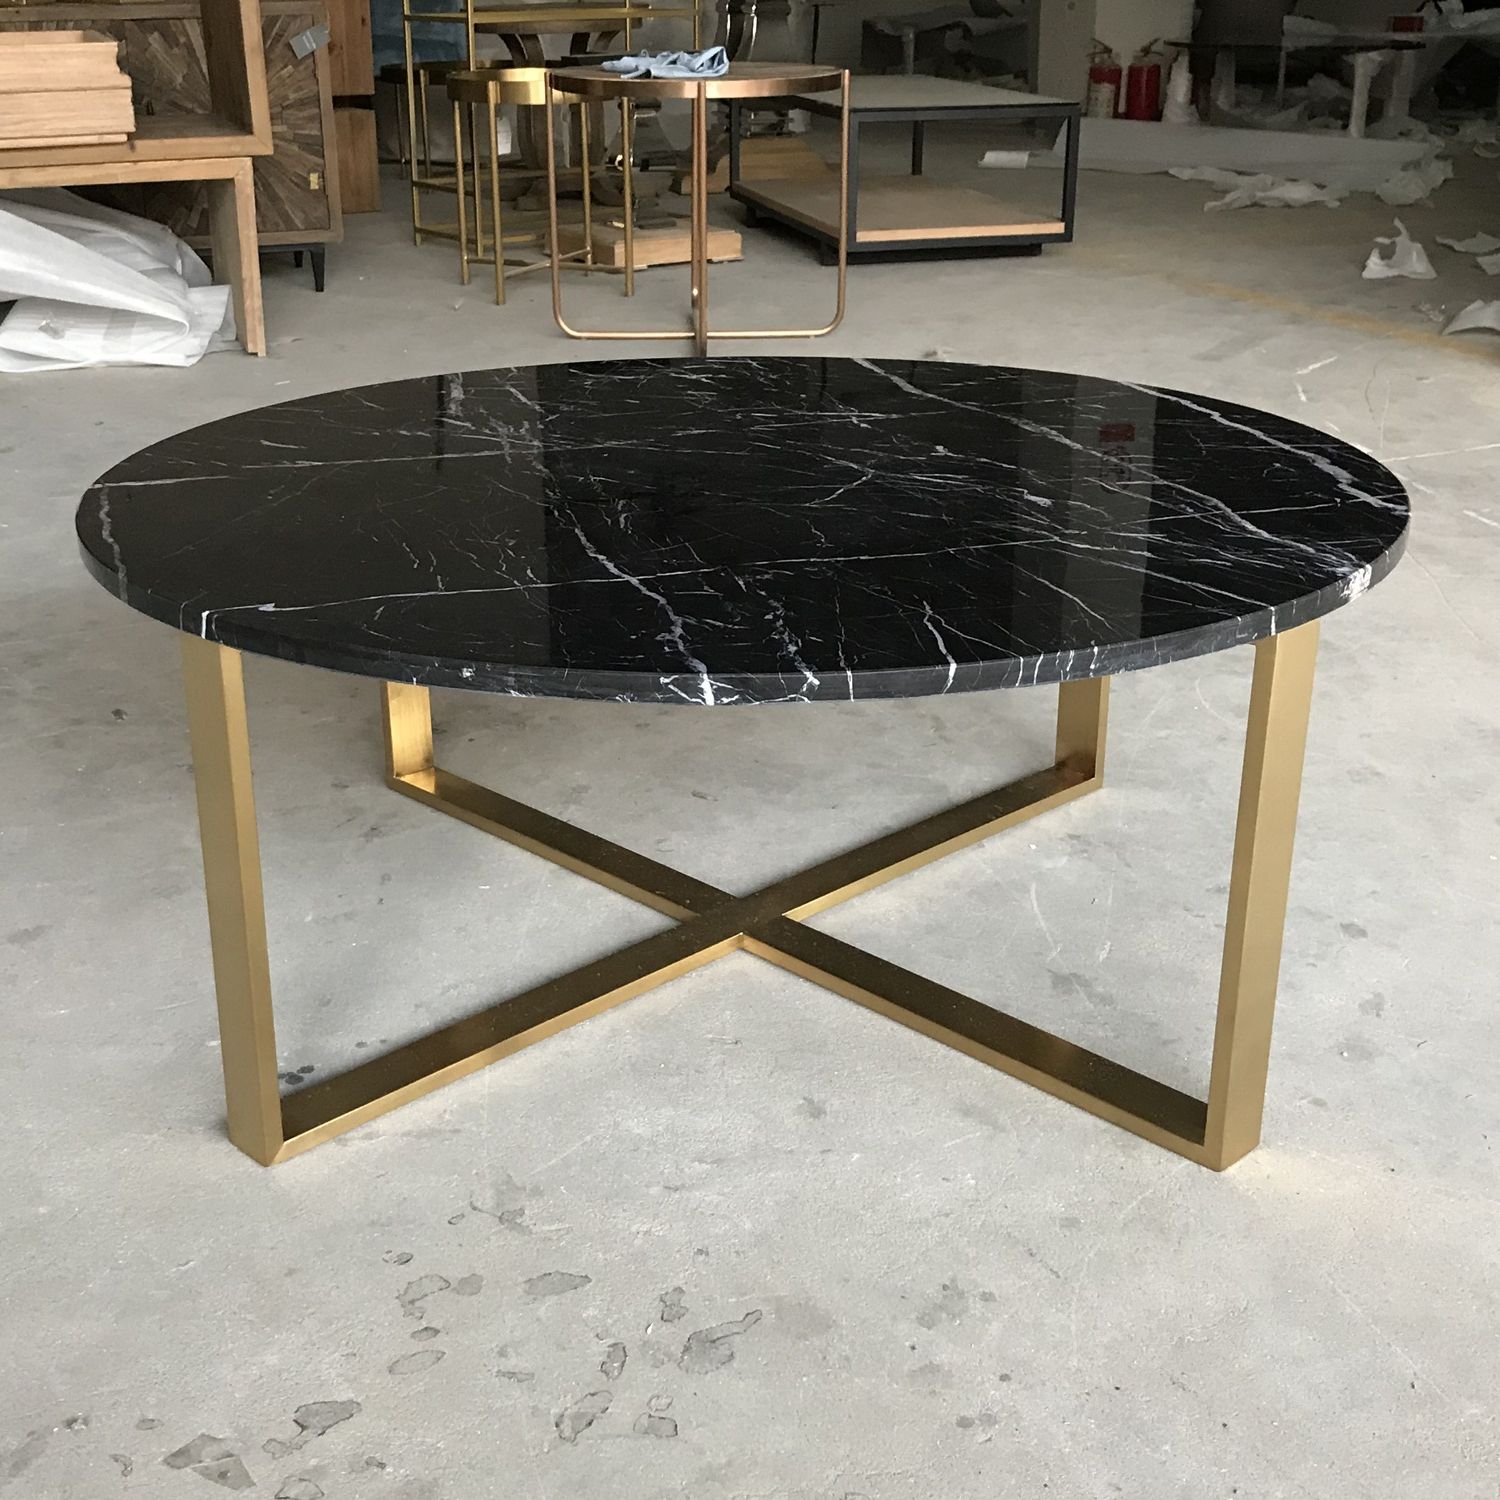 Gold Metal Base Wholesale Round Black Marble Coffee Table In Most Current White Marble Gold Metal Coffee Tables (View 15 of 20)